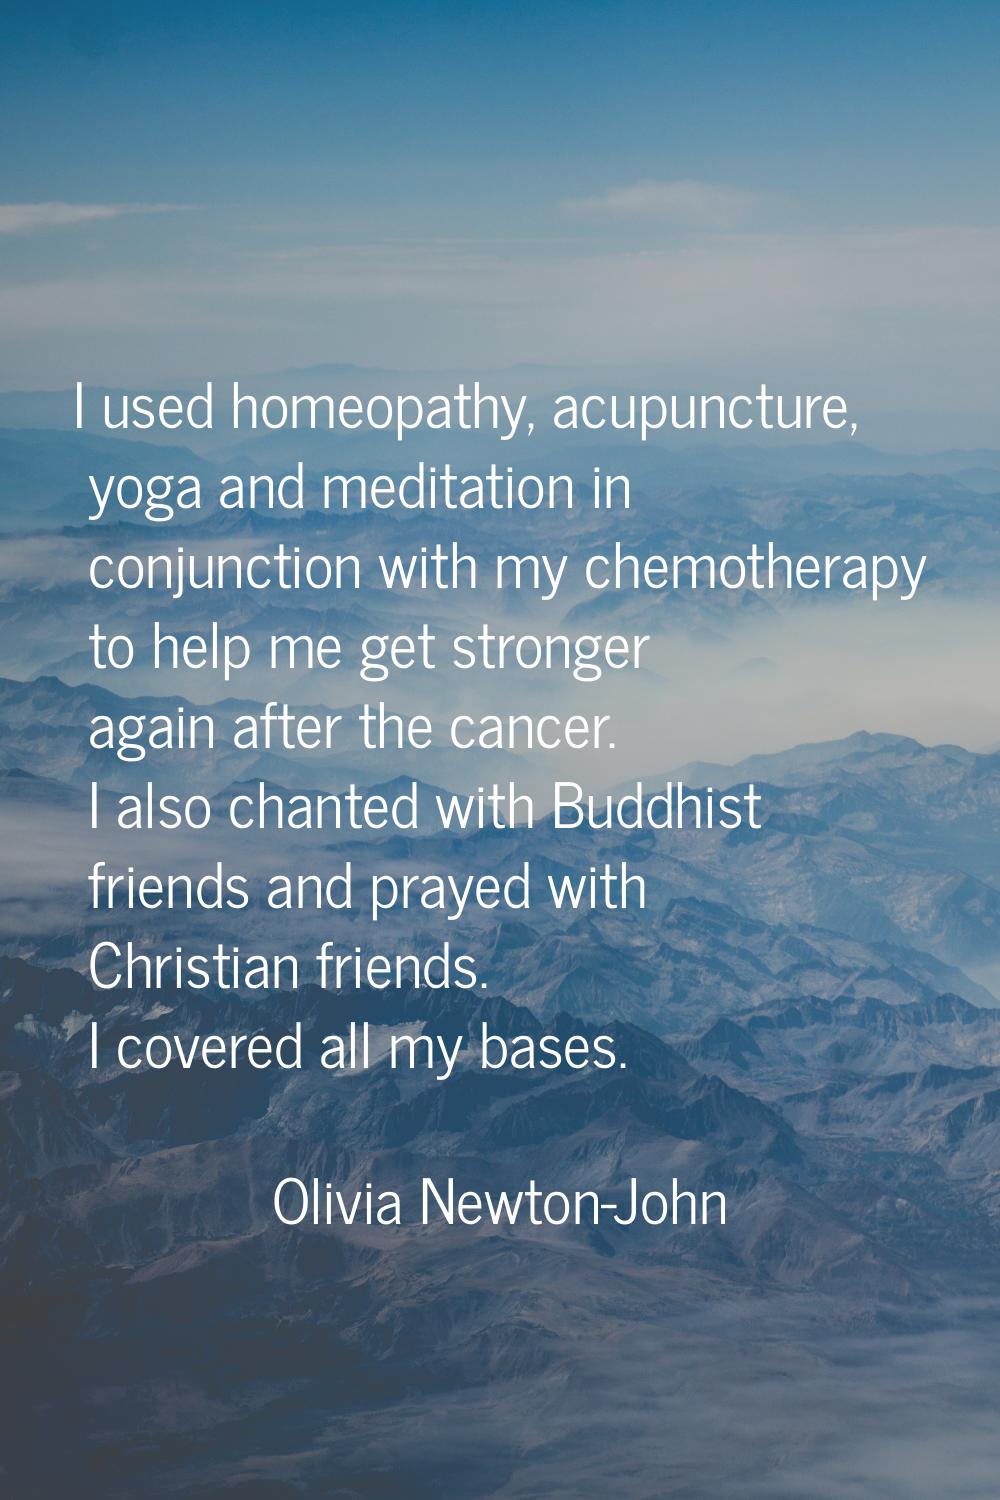 I used homeopathy, acupuncture, yoga and meditation in conjunction with my chemotherapy to help me 